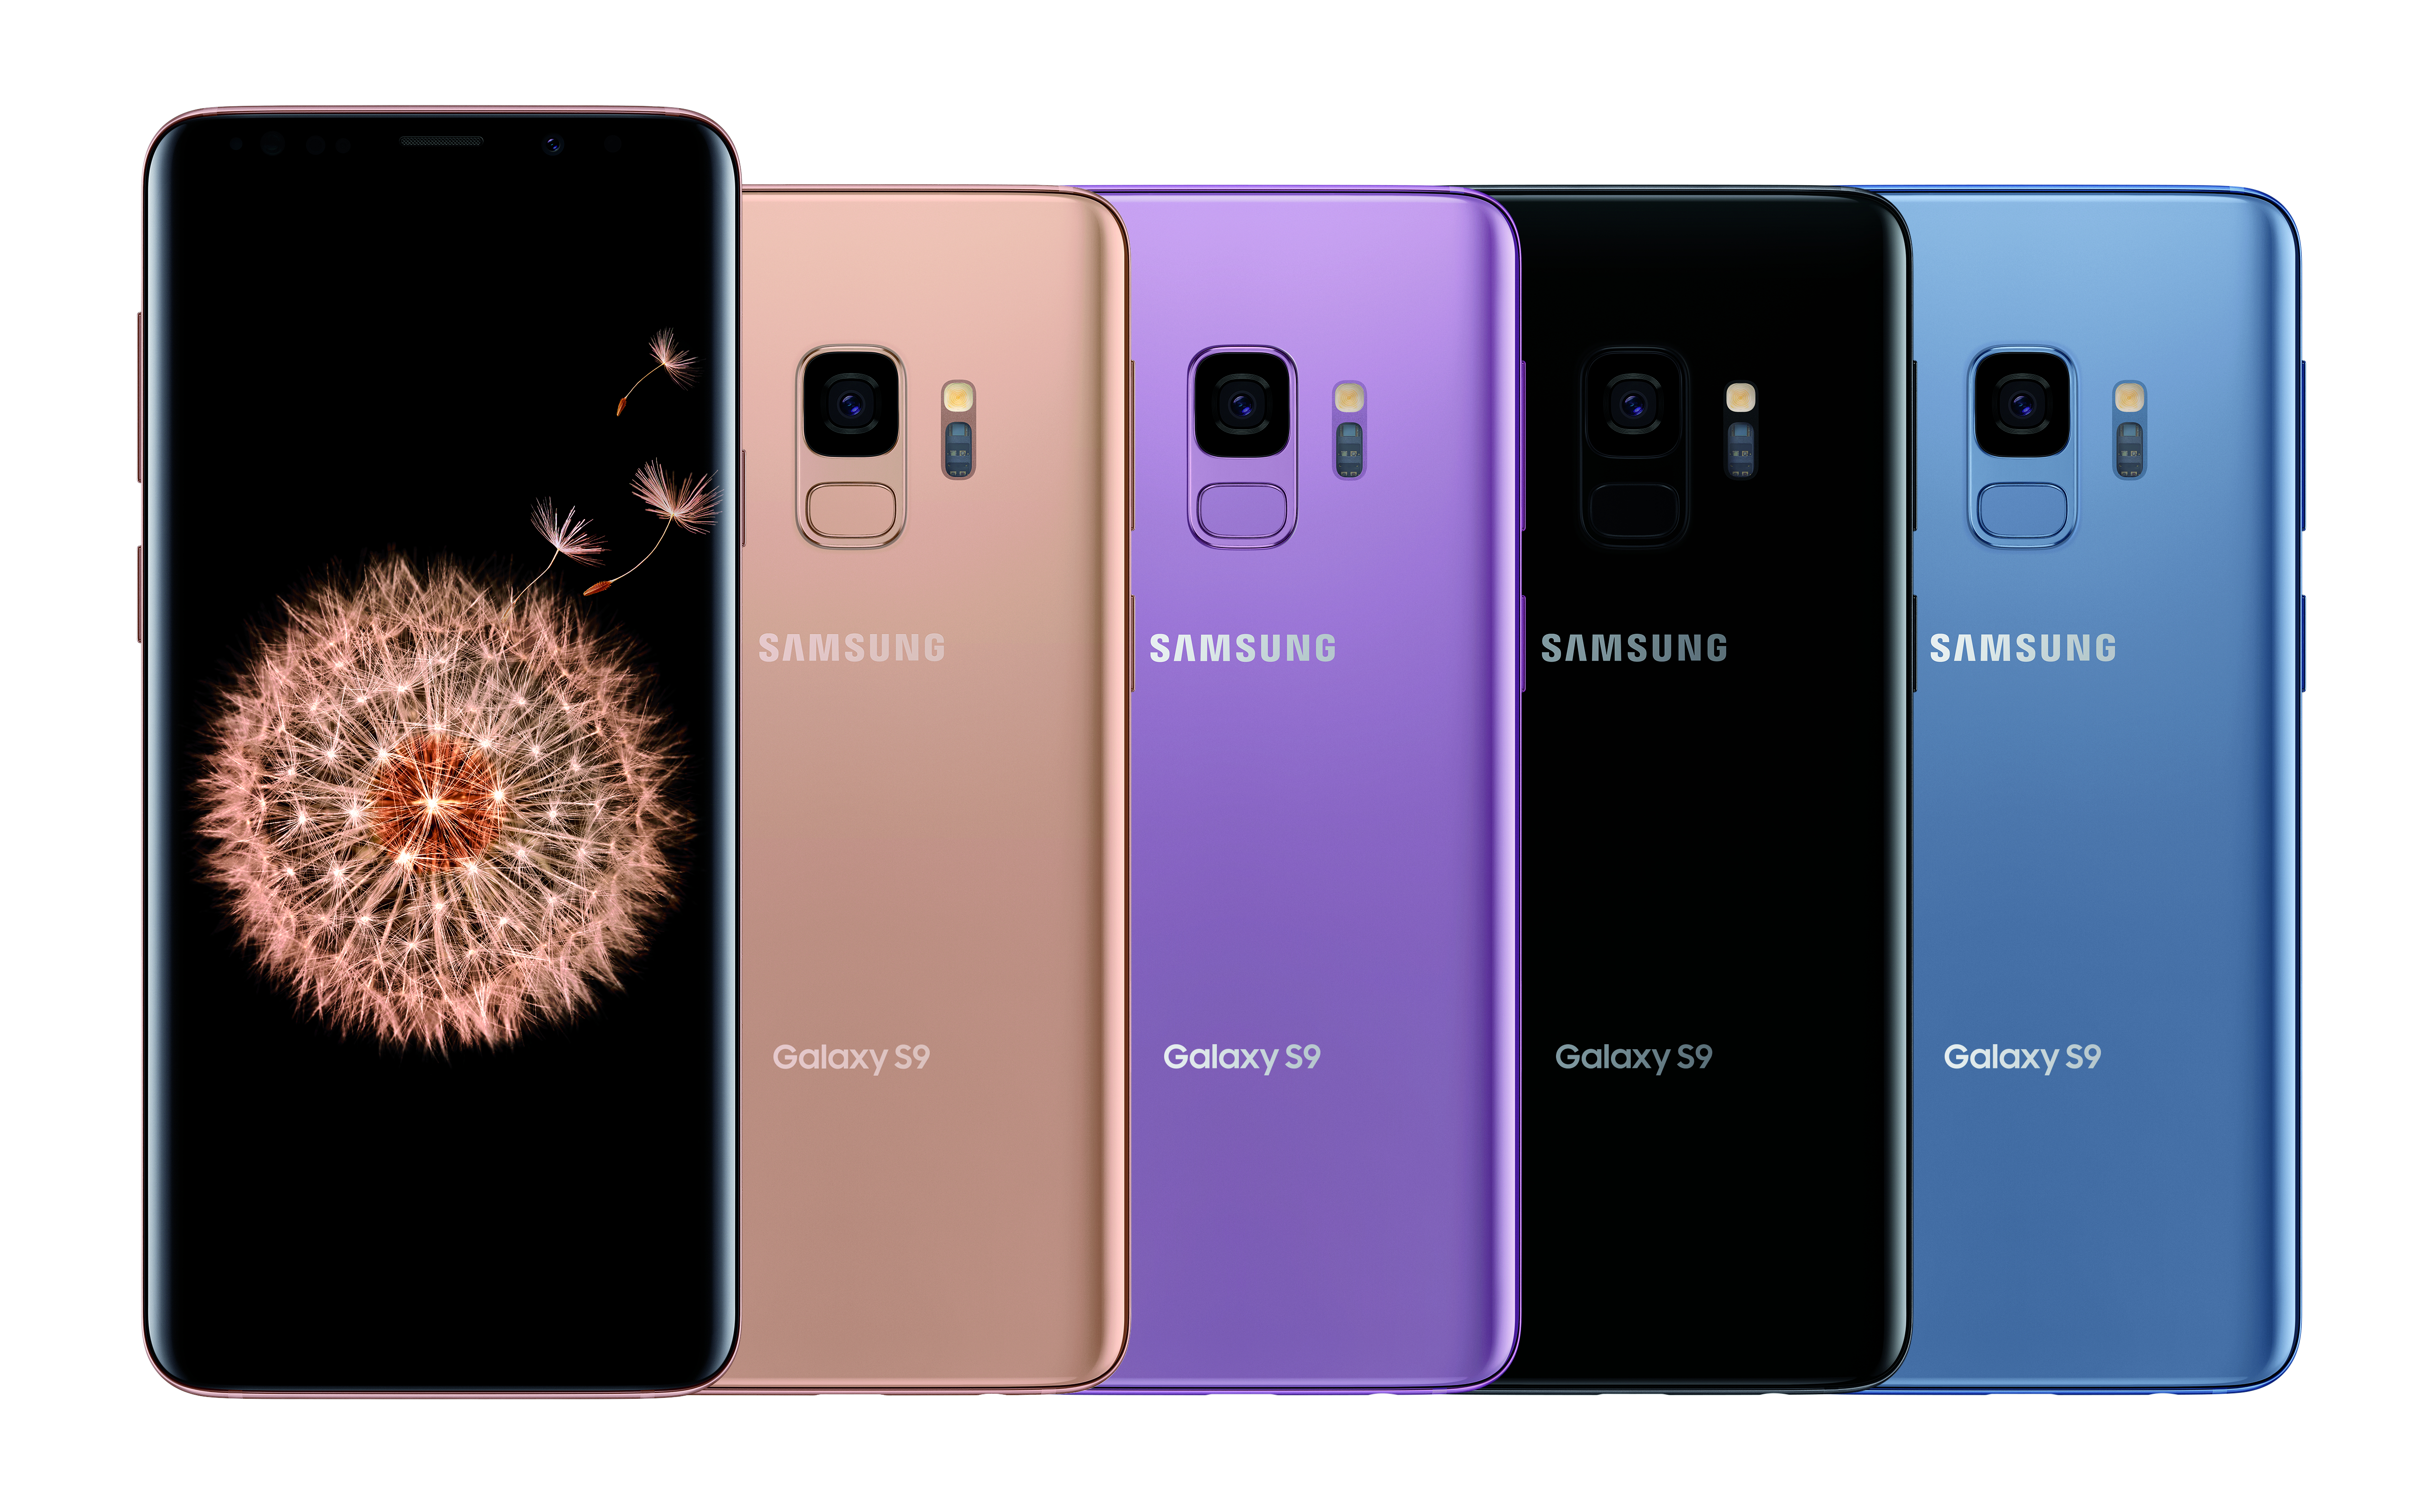 Samsung Galaxy S9 and S9+ Sunrise Gold Available to Order in the U.S